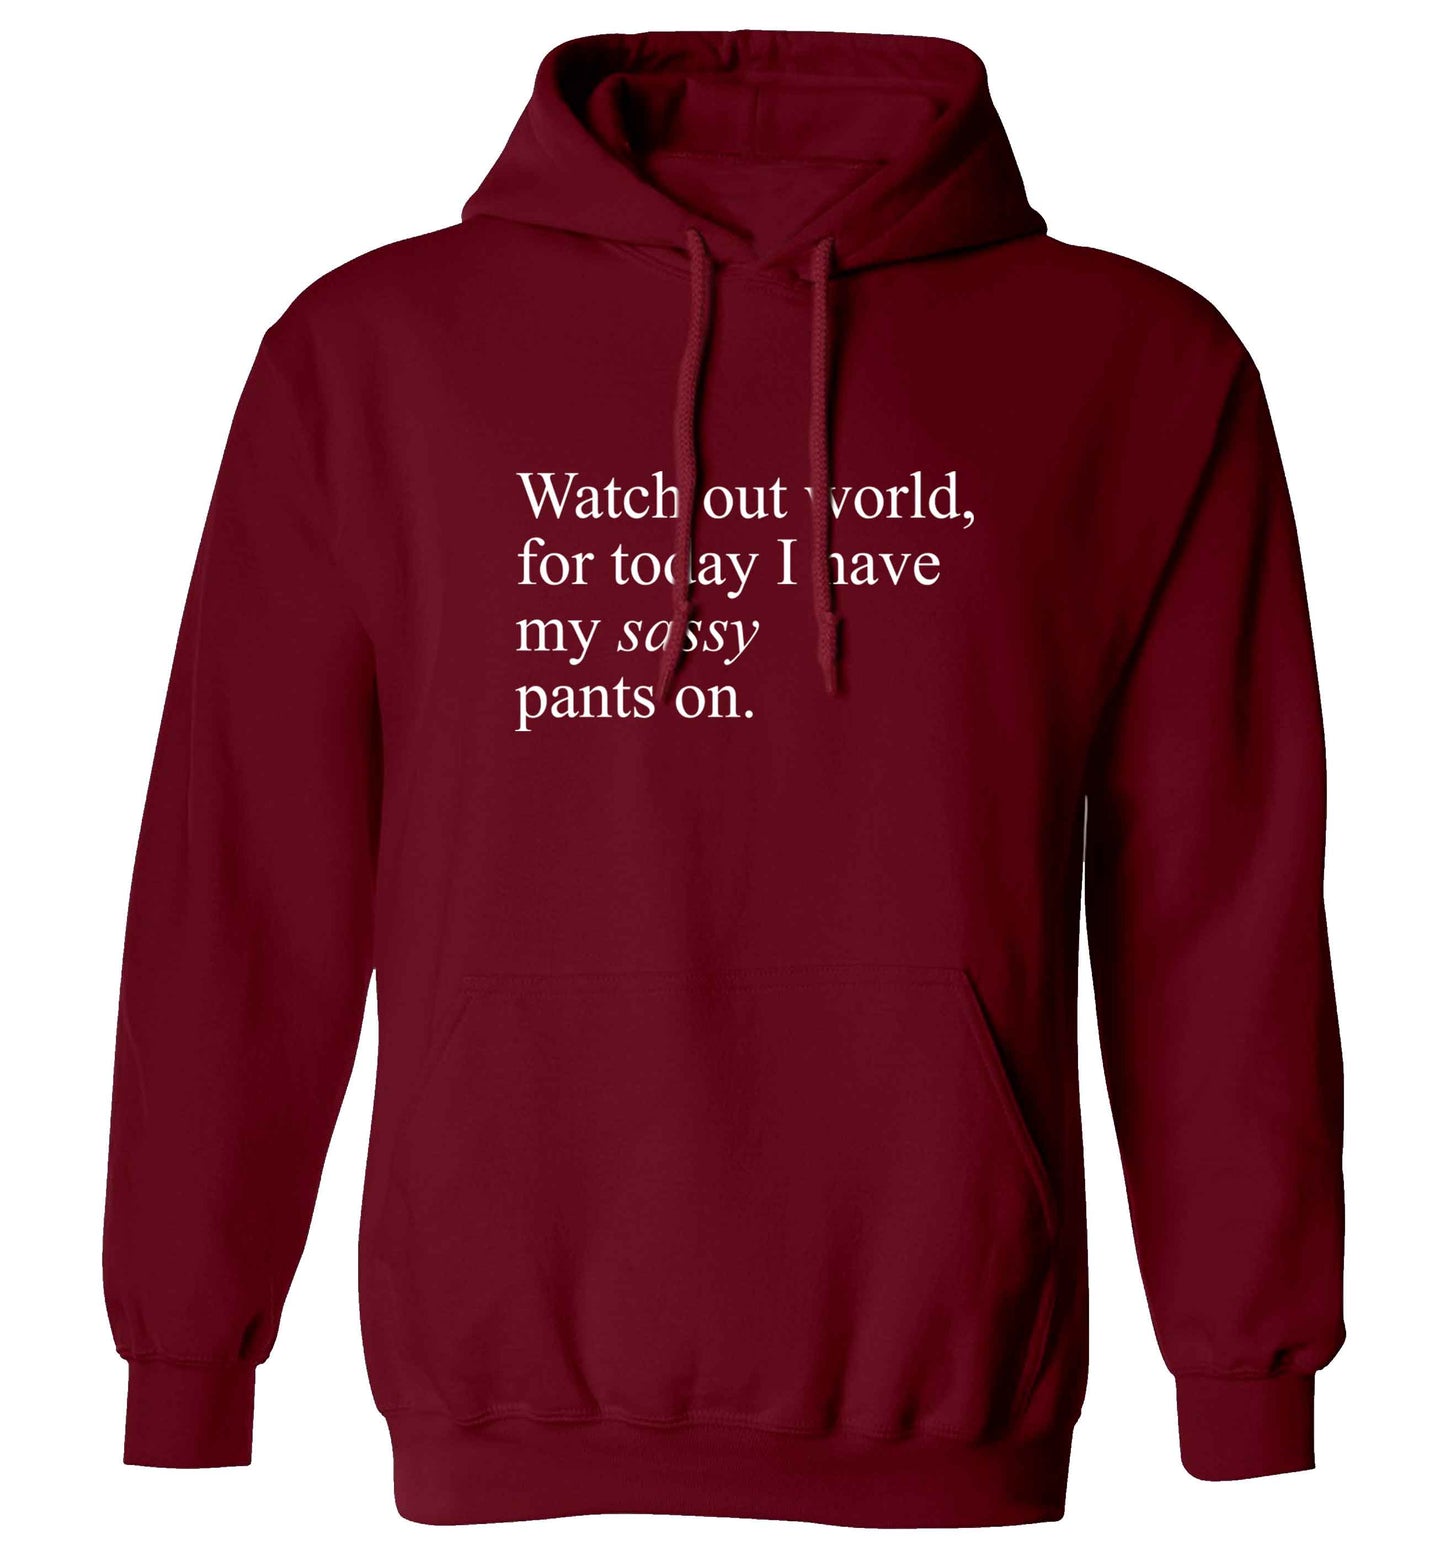 Watch out world for today I have my sassy pants on adults unisex maroon hoodie 2XL